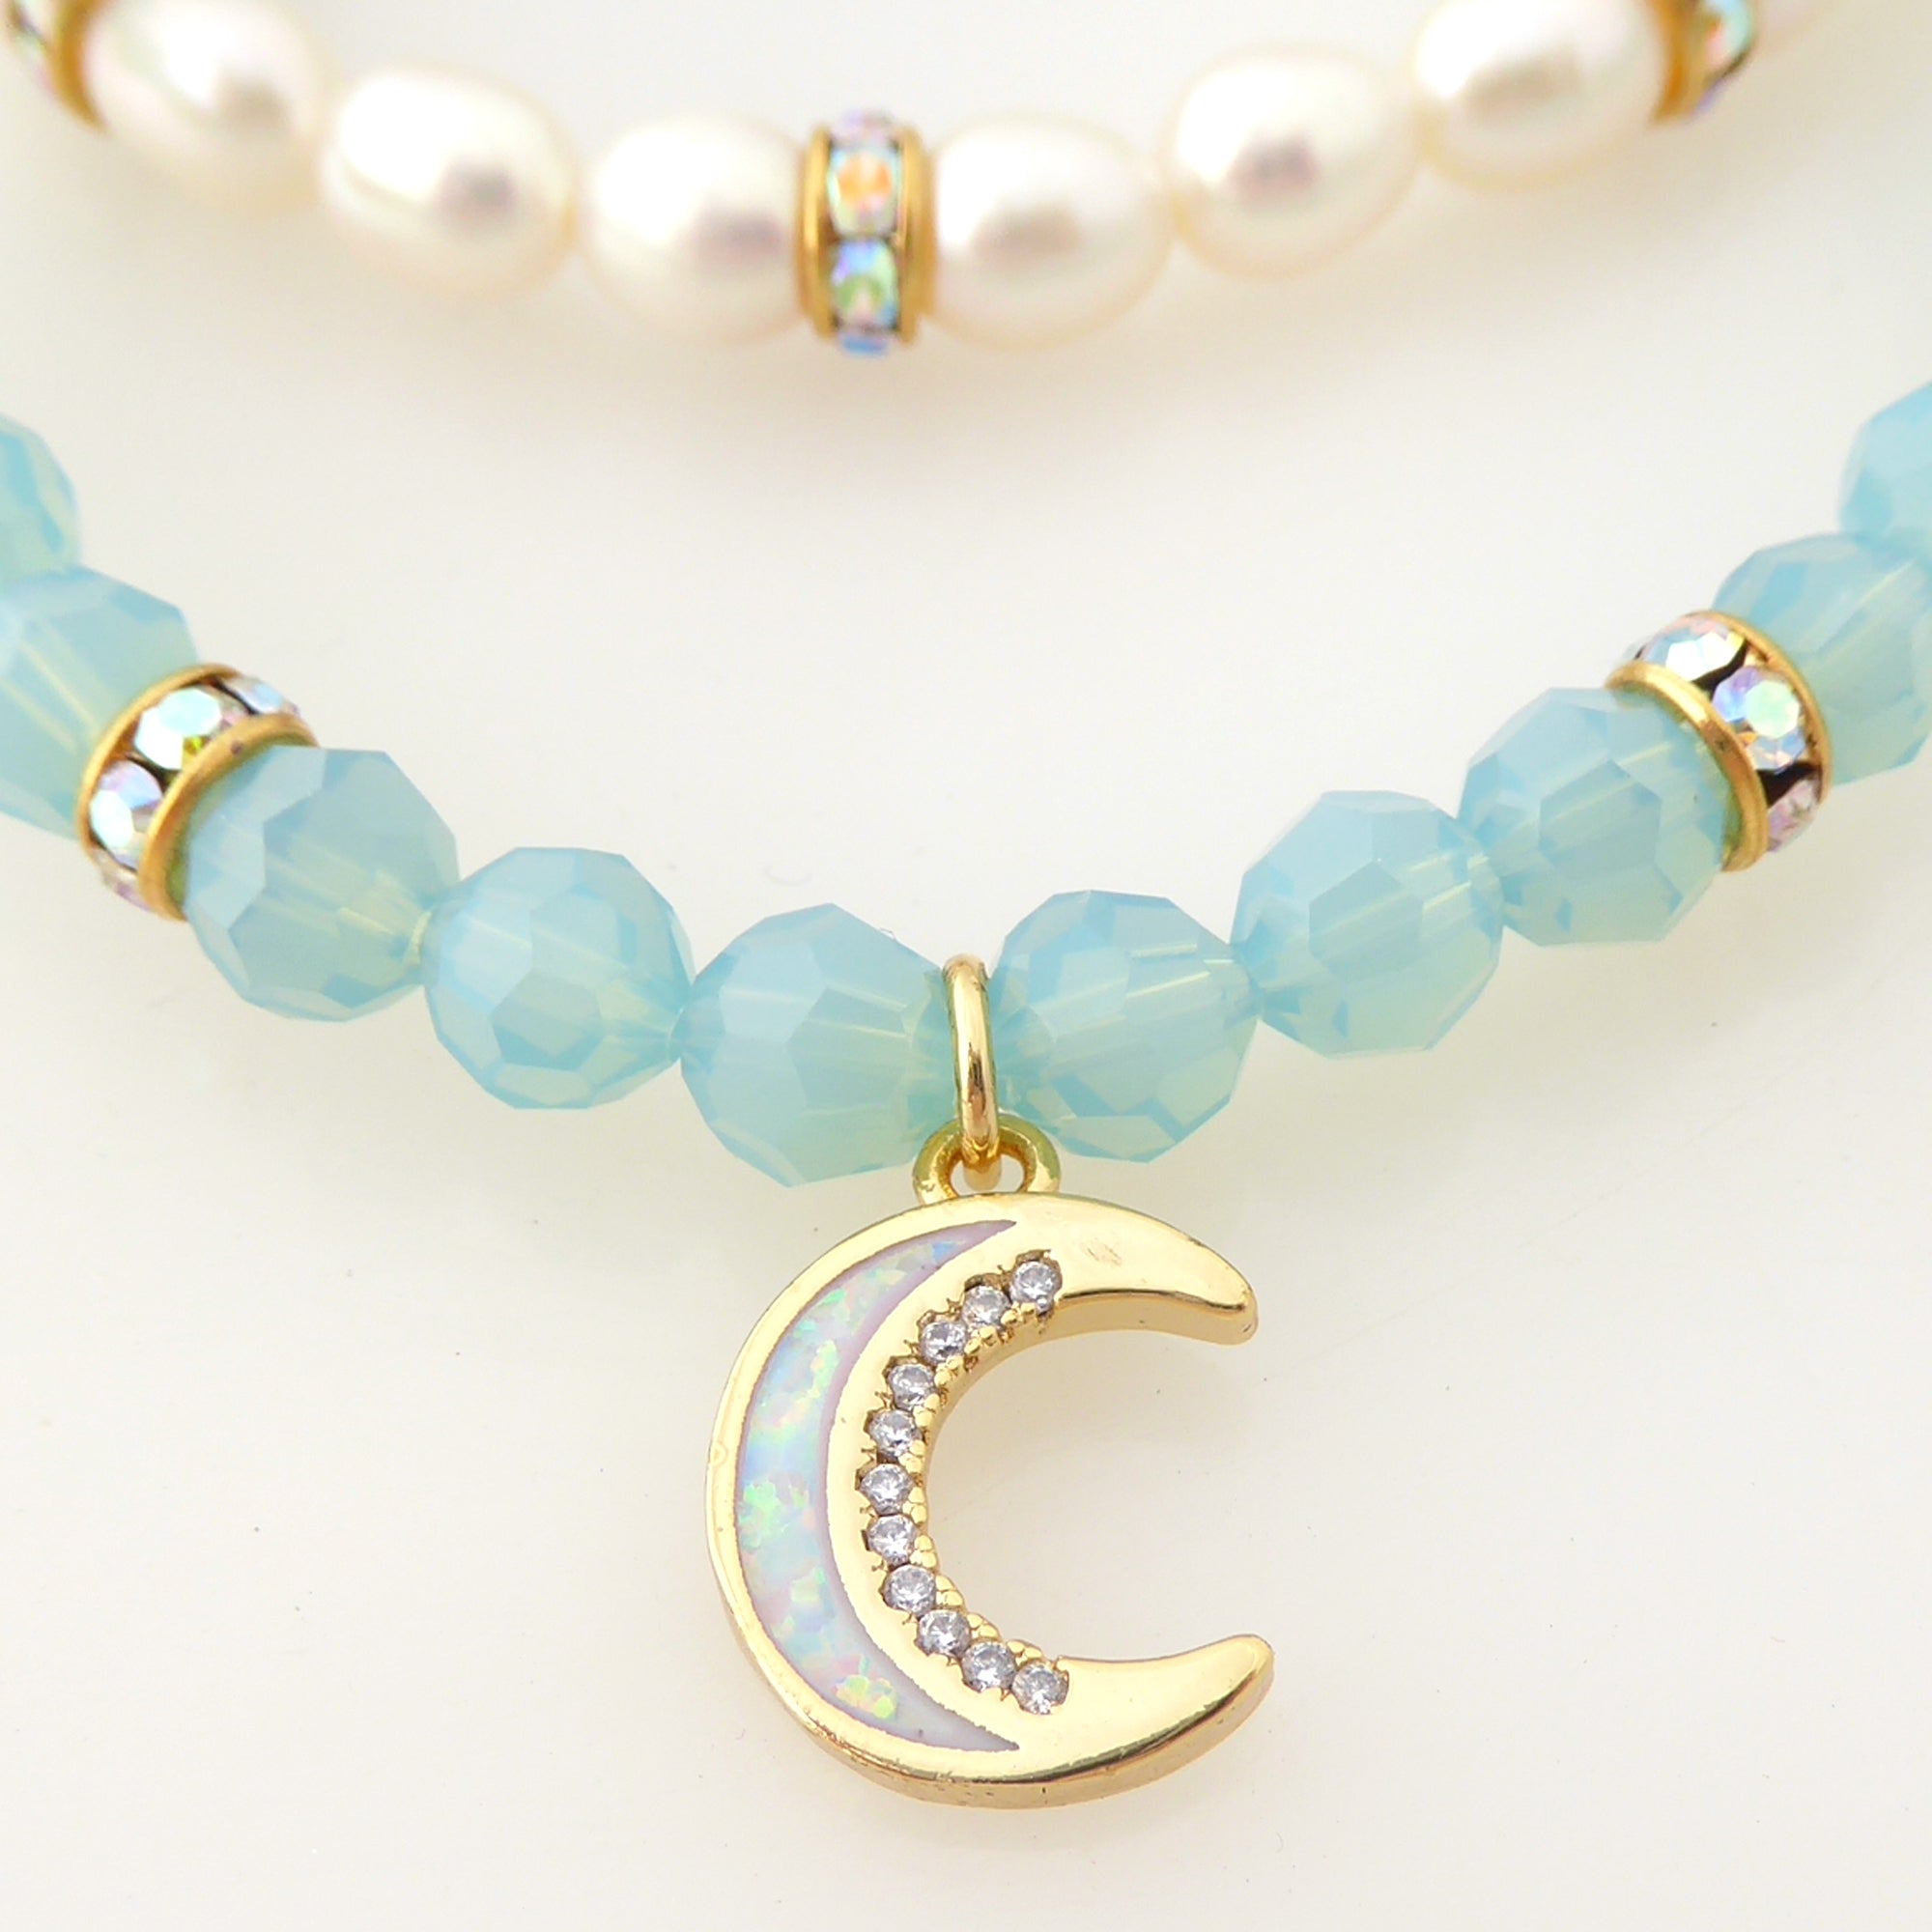 Crescent moon and pearl bracelet set by Jenny Dayco 4